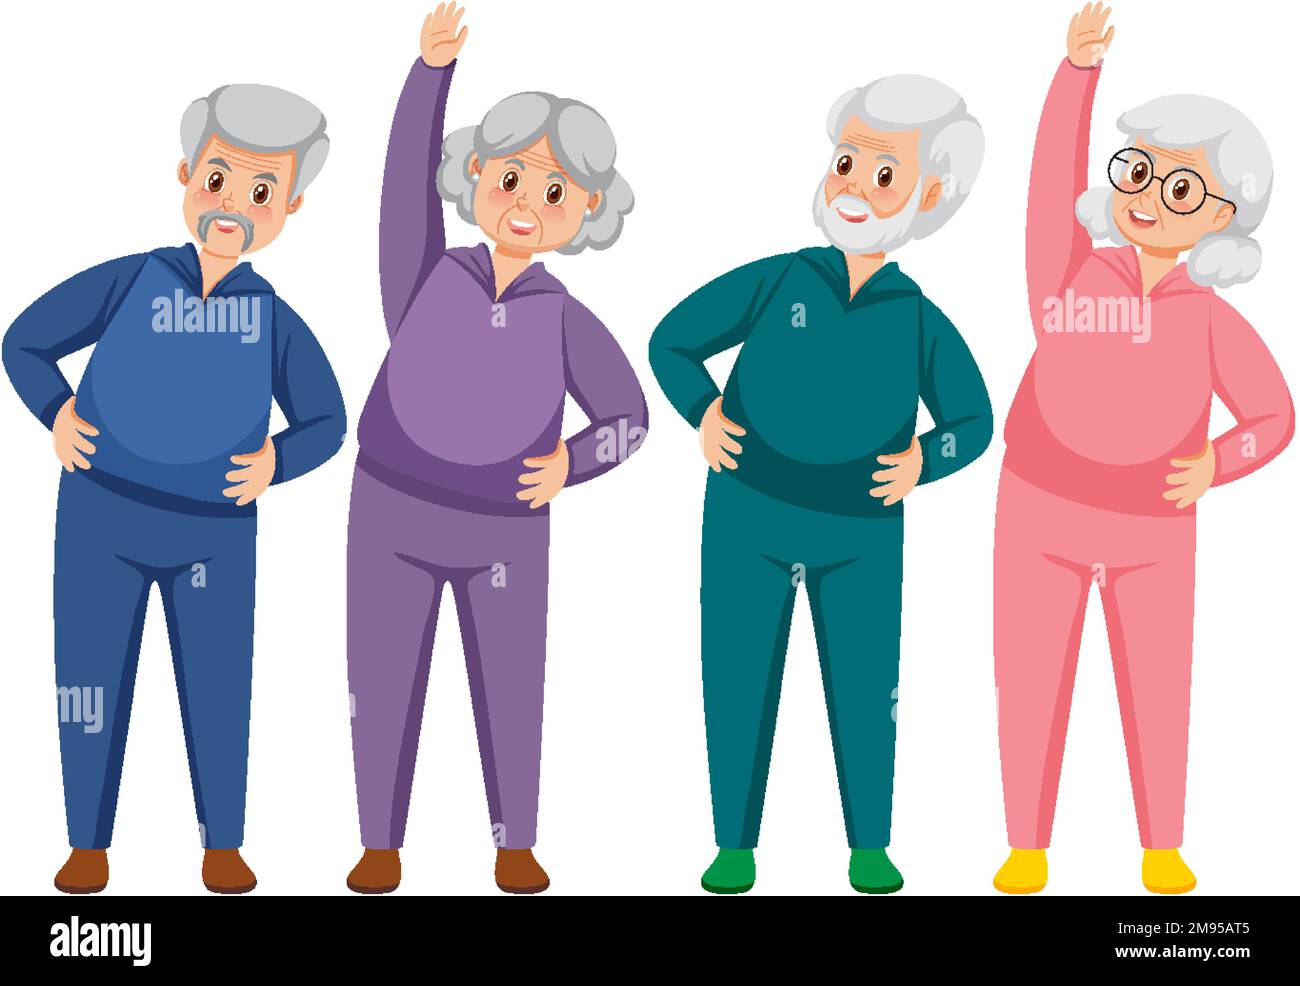 Four senior people in exercise outfit illustration Stock Vector